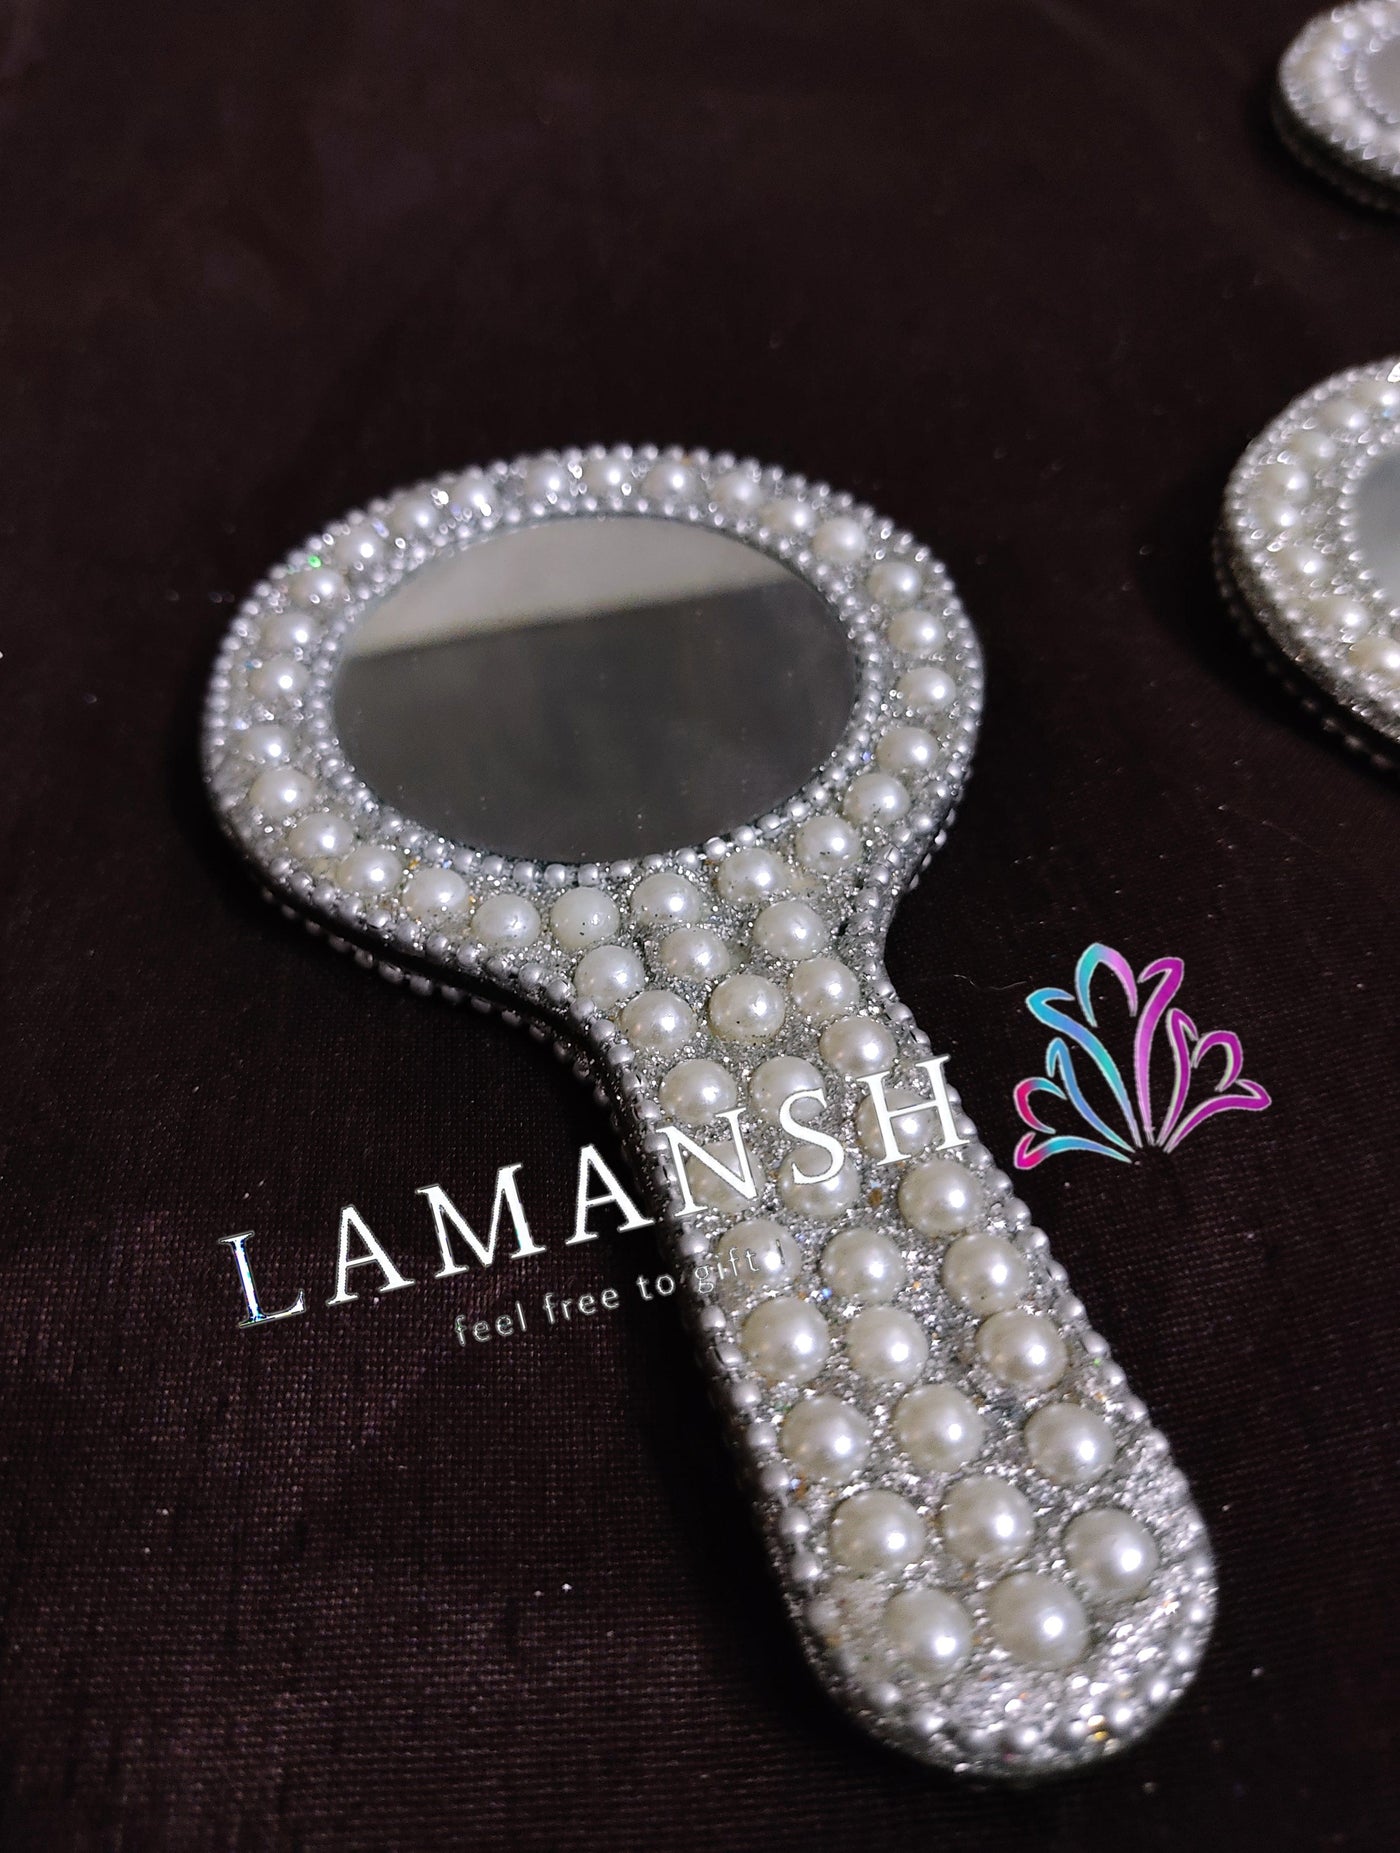 LAMANSH Hand Mirrors for gifting Silver / Lakh work / Standard LAMANSH® (Pack of 20) Small Size Round Handheld Purse Mirror for Women and Men, Ergonomic Compact Magnifying Hand Mirror for Makeup, Handy Mirror for Travel with Durable Handle, Shell Color / Perfect for Gifting 🎁